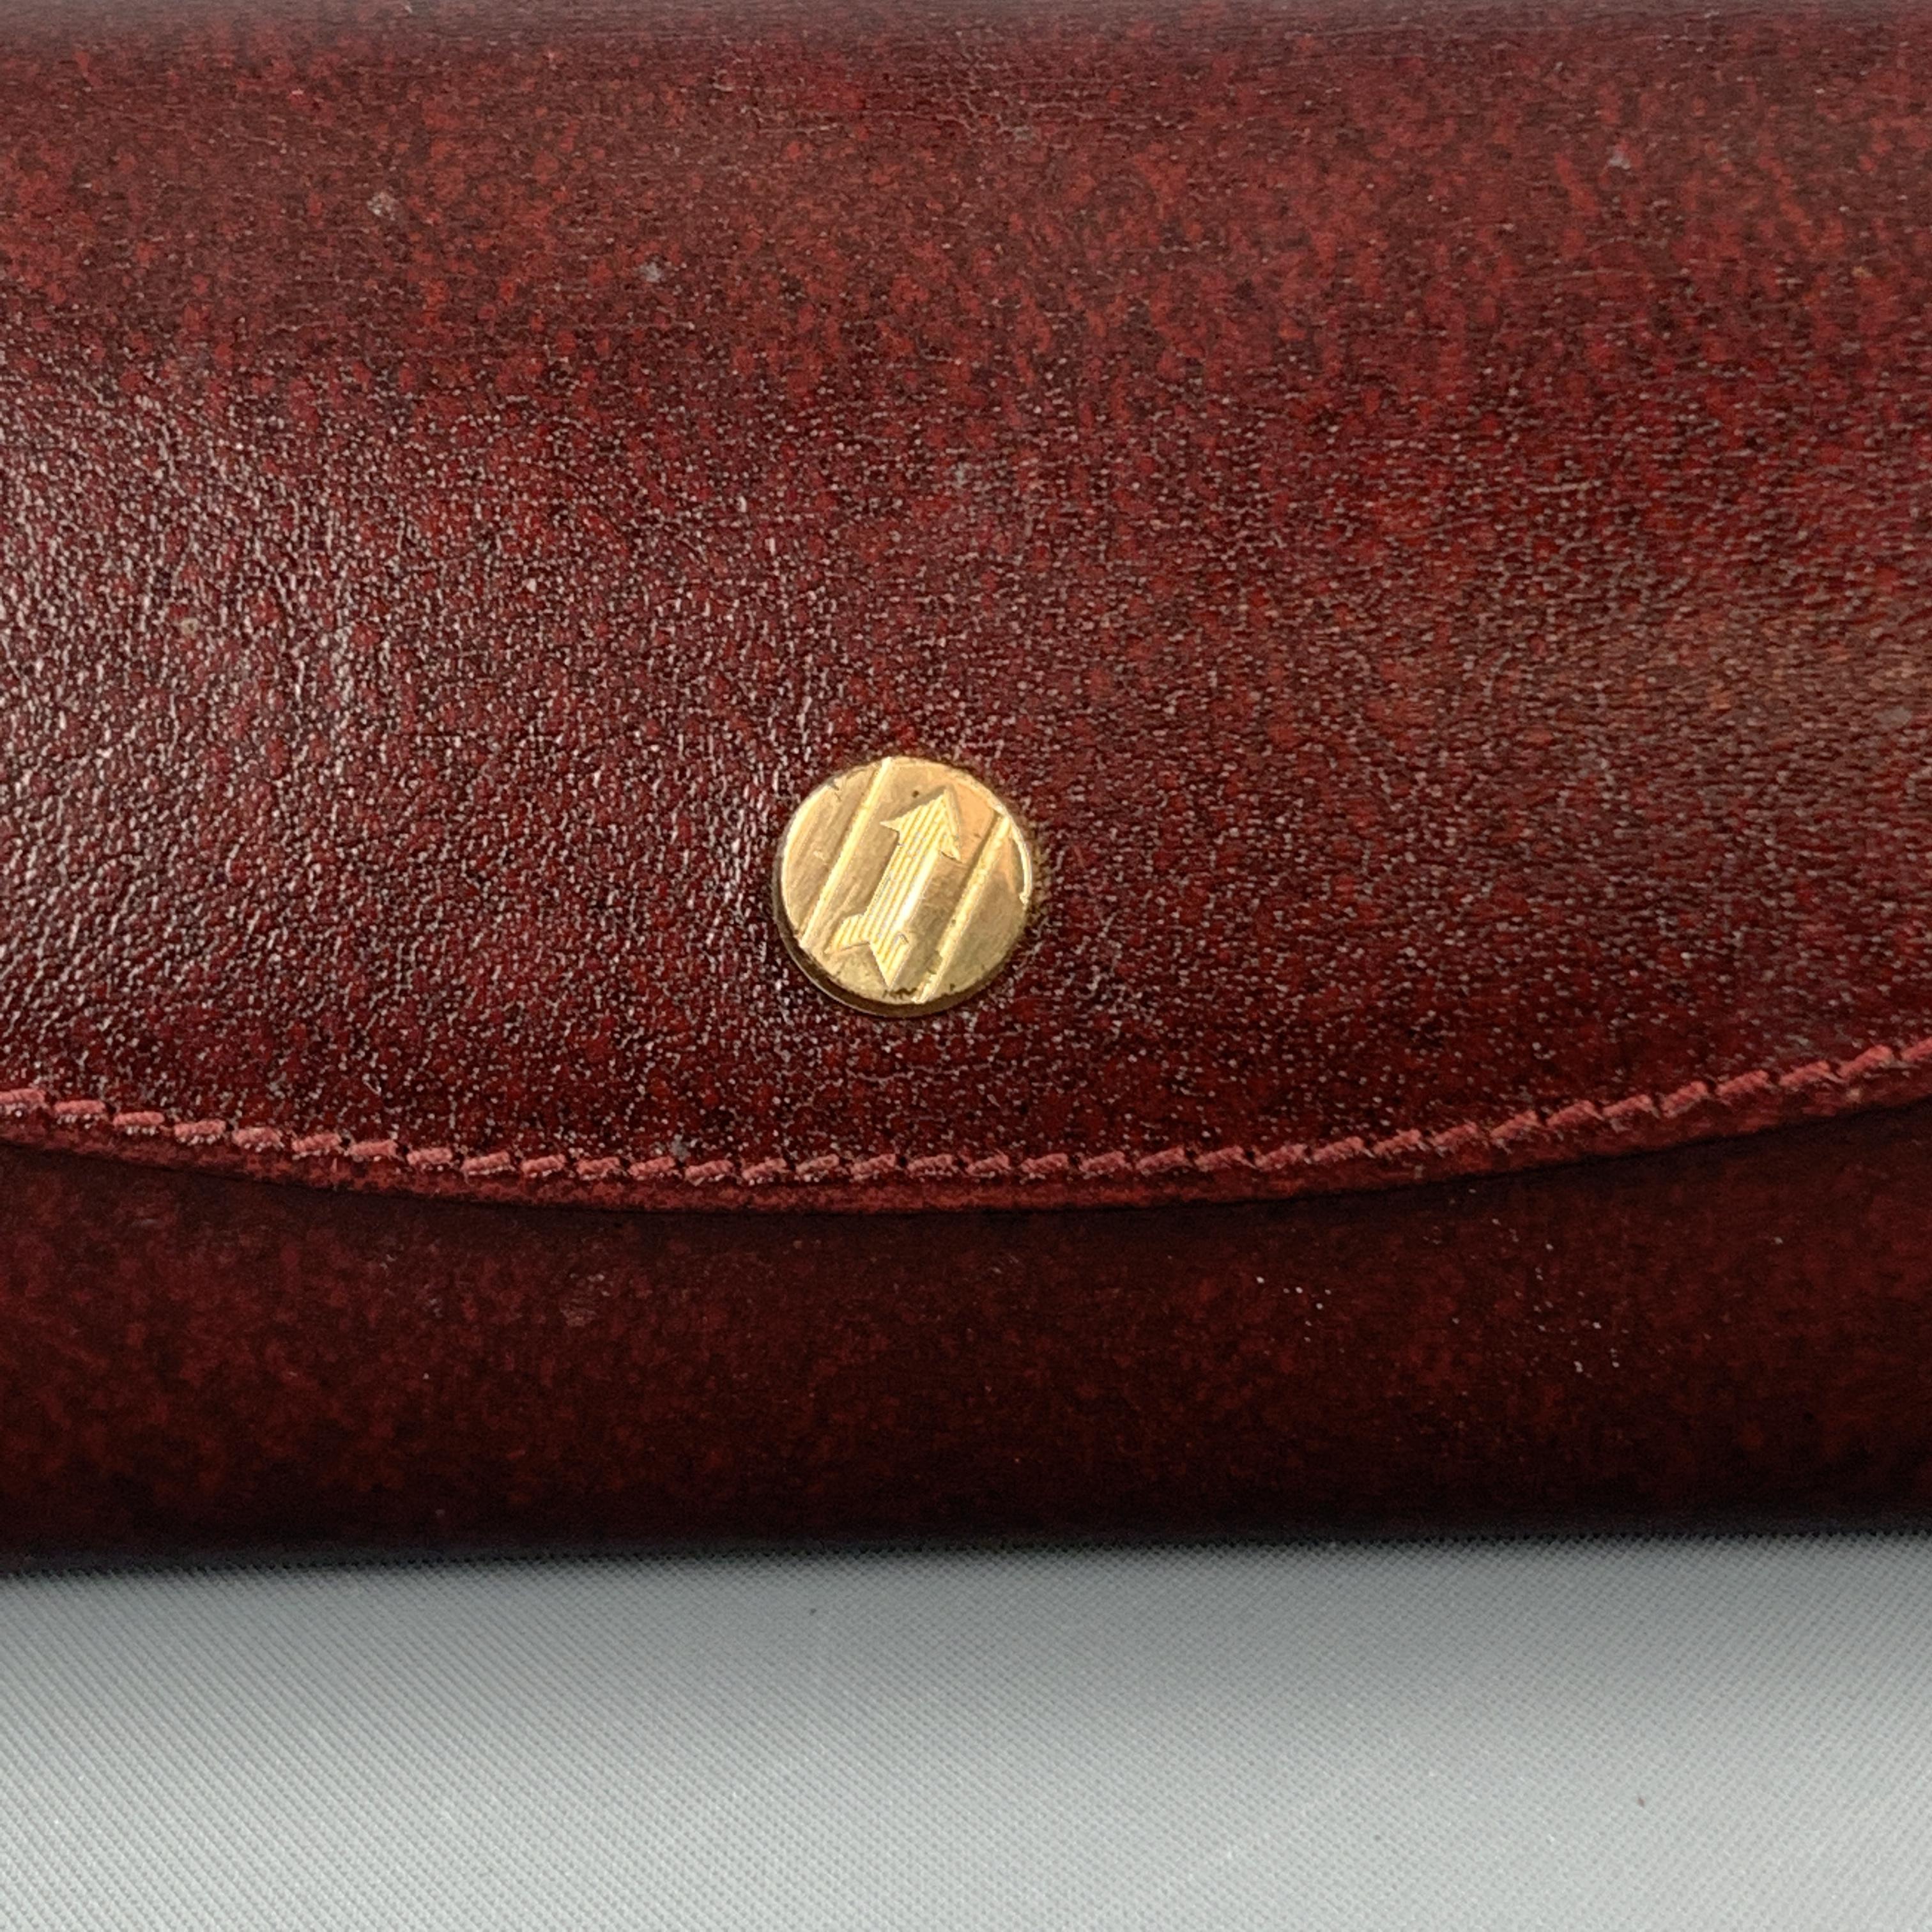 GOLDPFEIL sunglasses case comes in burgundy leather with a snap flap closure. 

Very Good Pre-Owned Condition.

Size: 6 x 2.75 in.
Width: 1 in. 